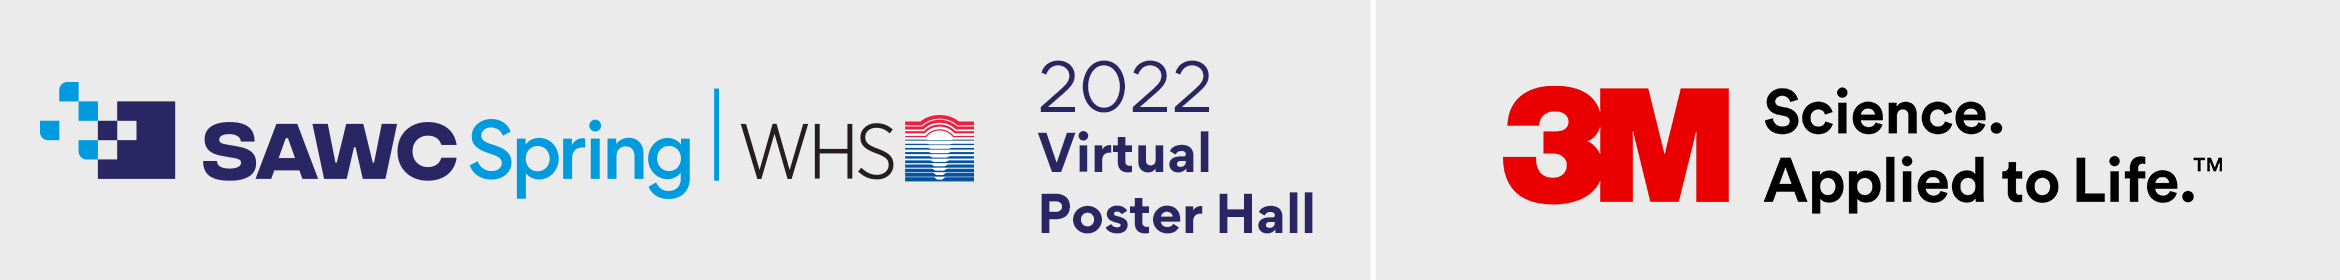 SAWC Spring 2022 Posters Main banner